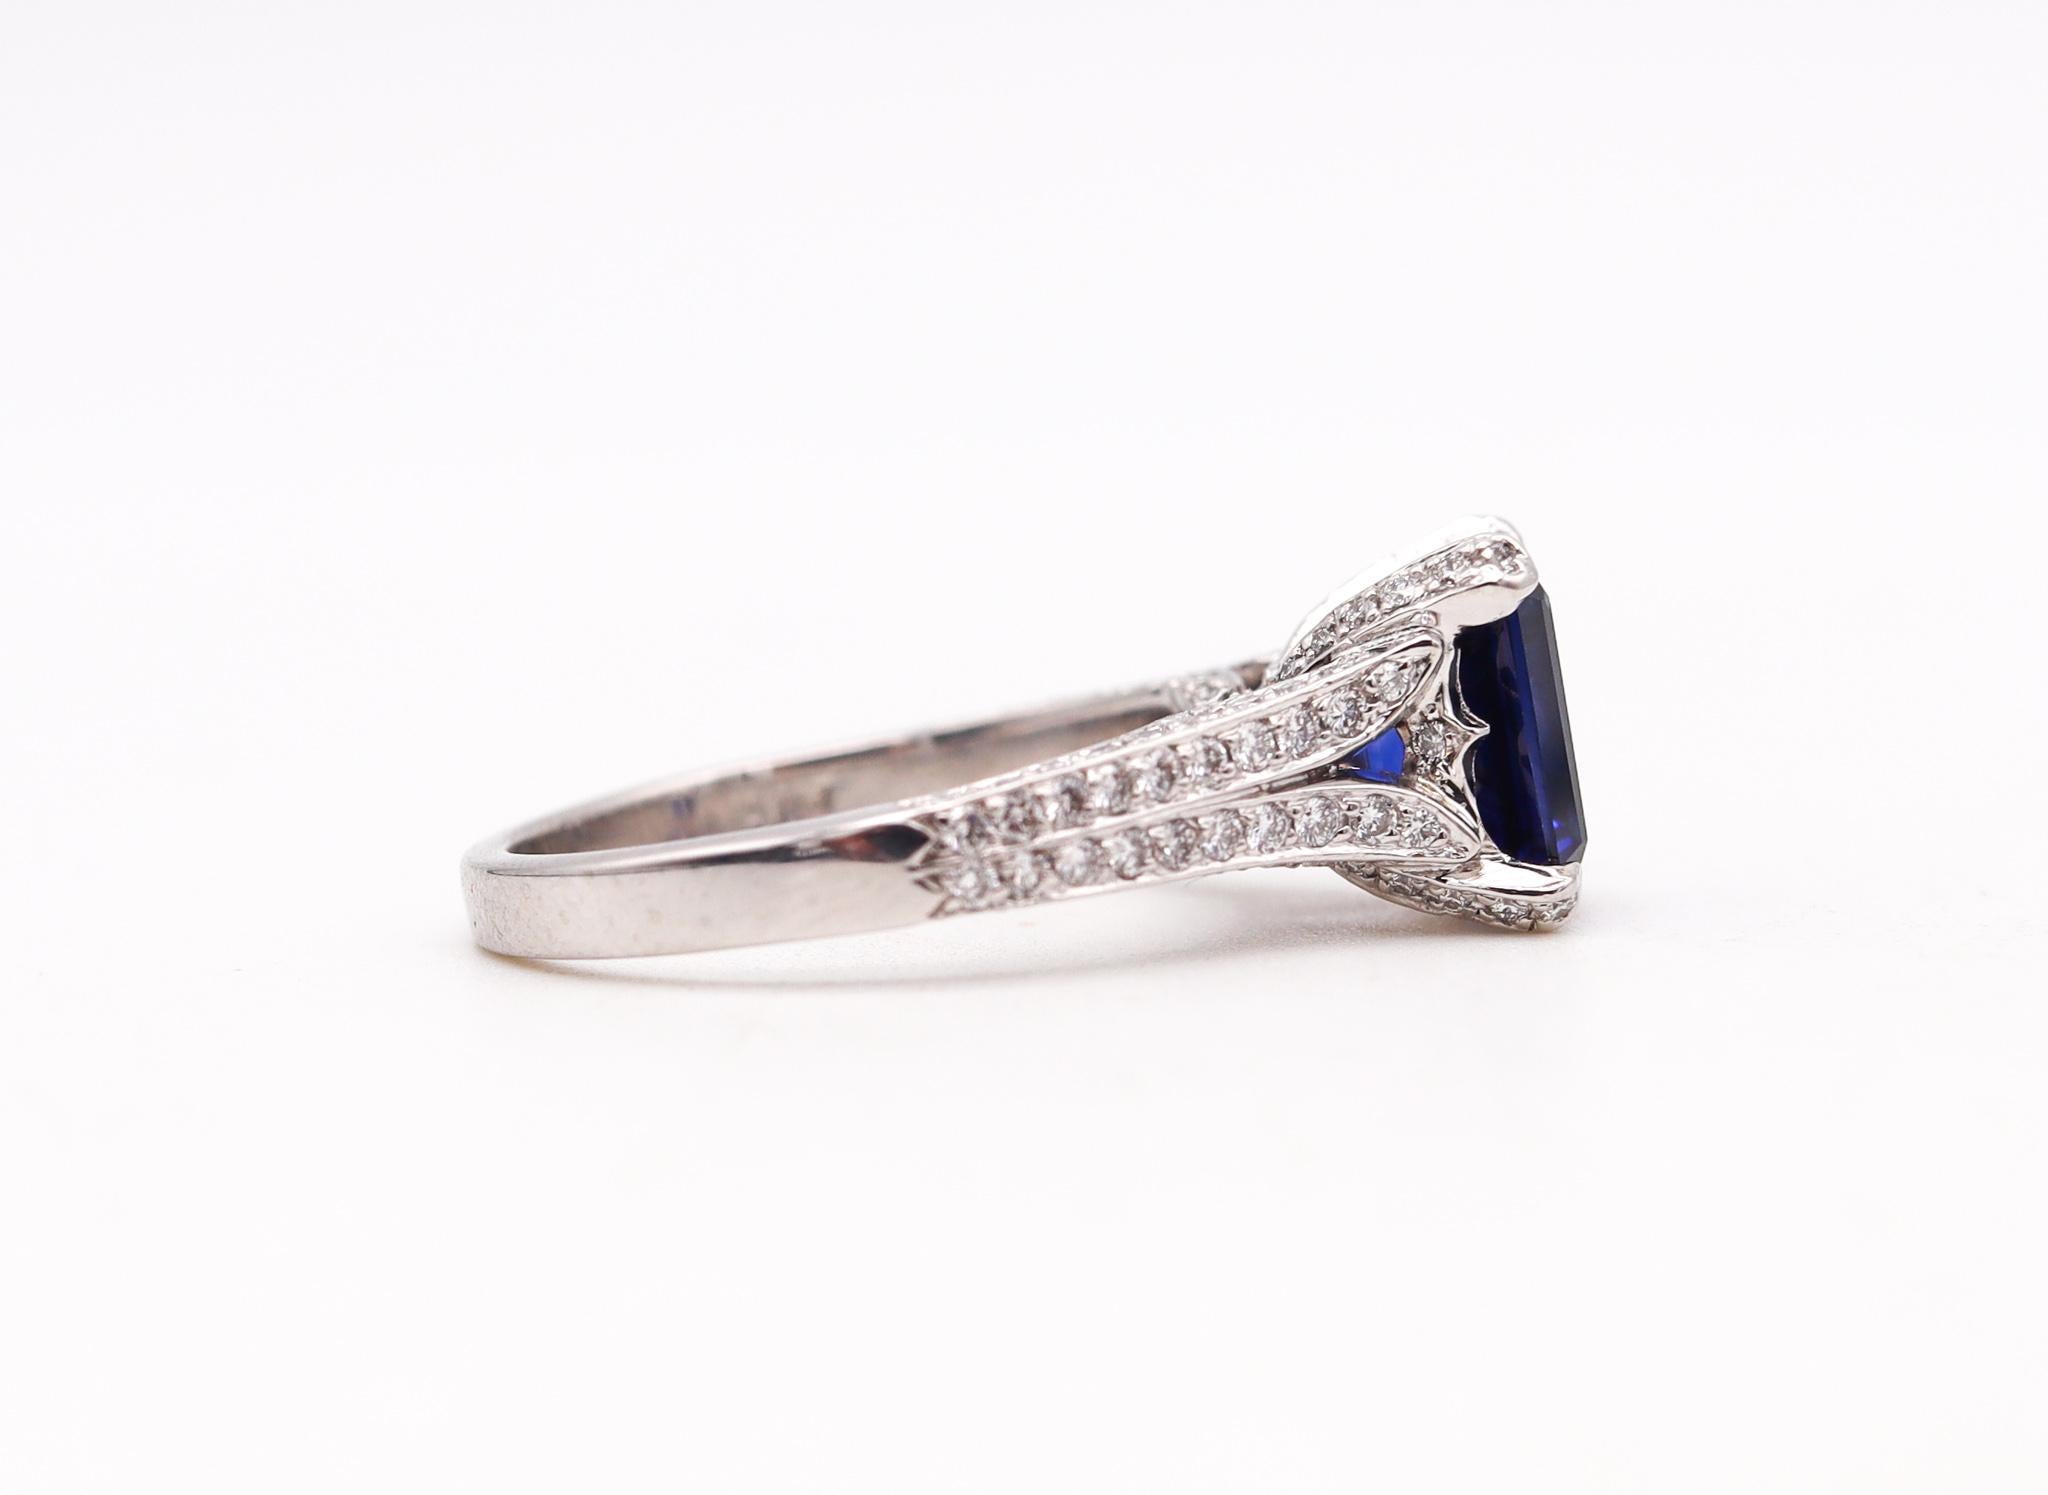 Charles Krypell Modern Ring in Platinum with 4.91 Ctw in Diamonds and Tanzanite In Excellent Condition For Sale In Miami, FL